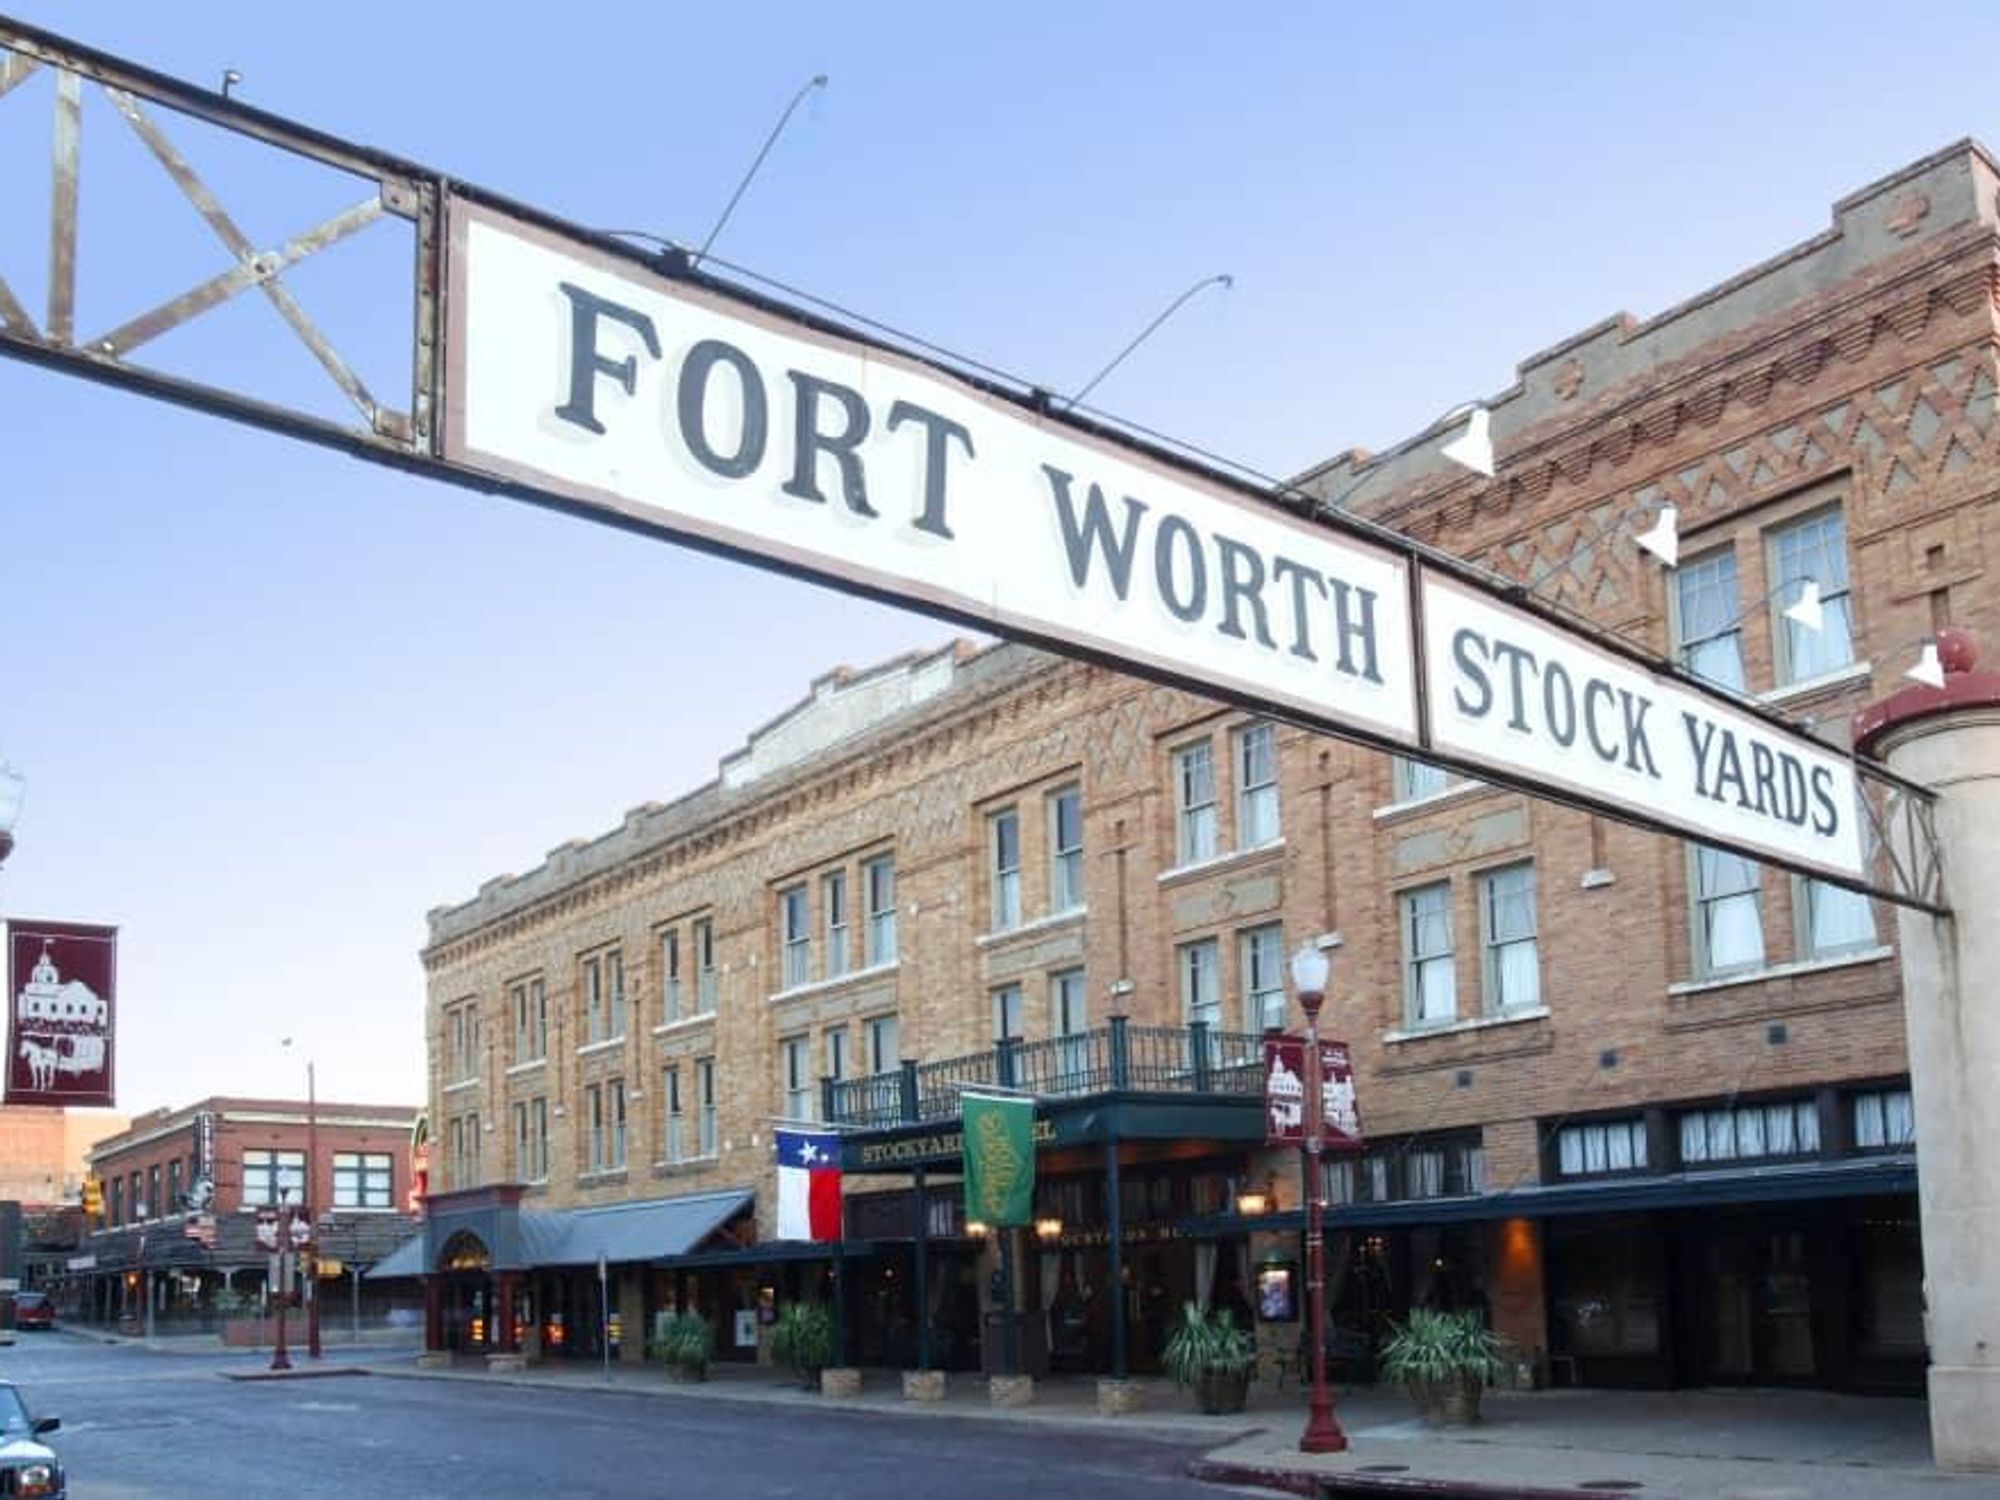 New self-guided walking tour showcases Fort Worth Stockyards’ many Hollywood ties